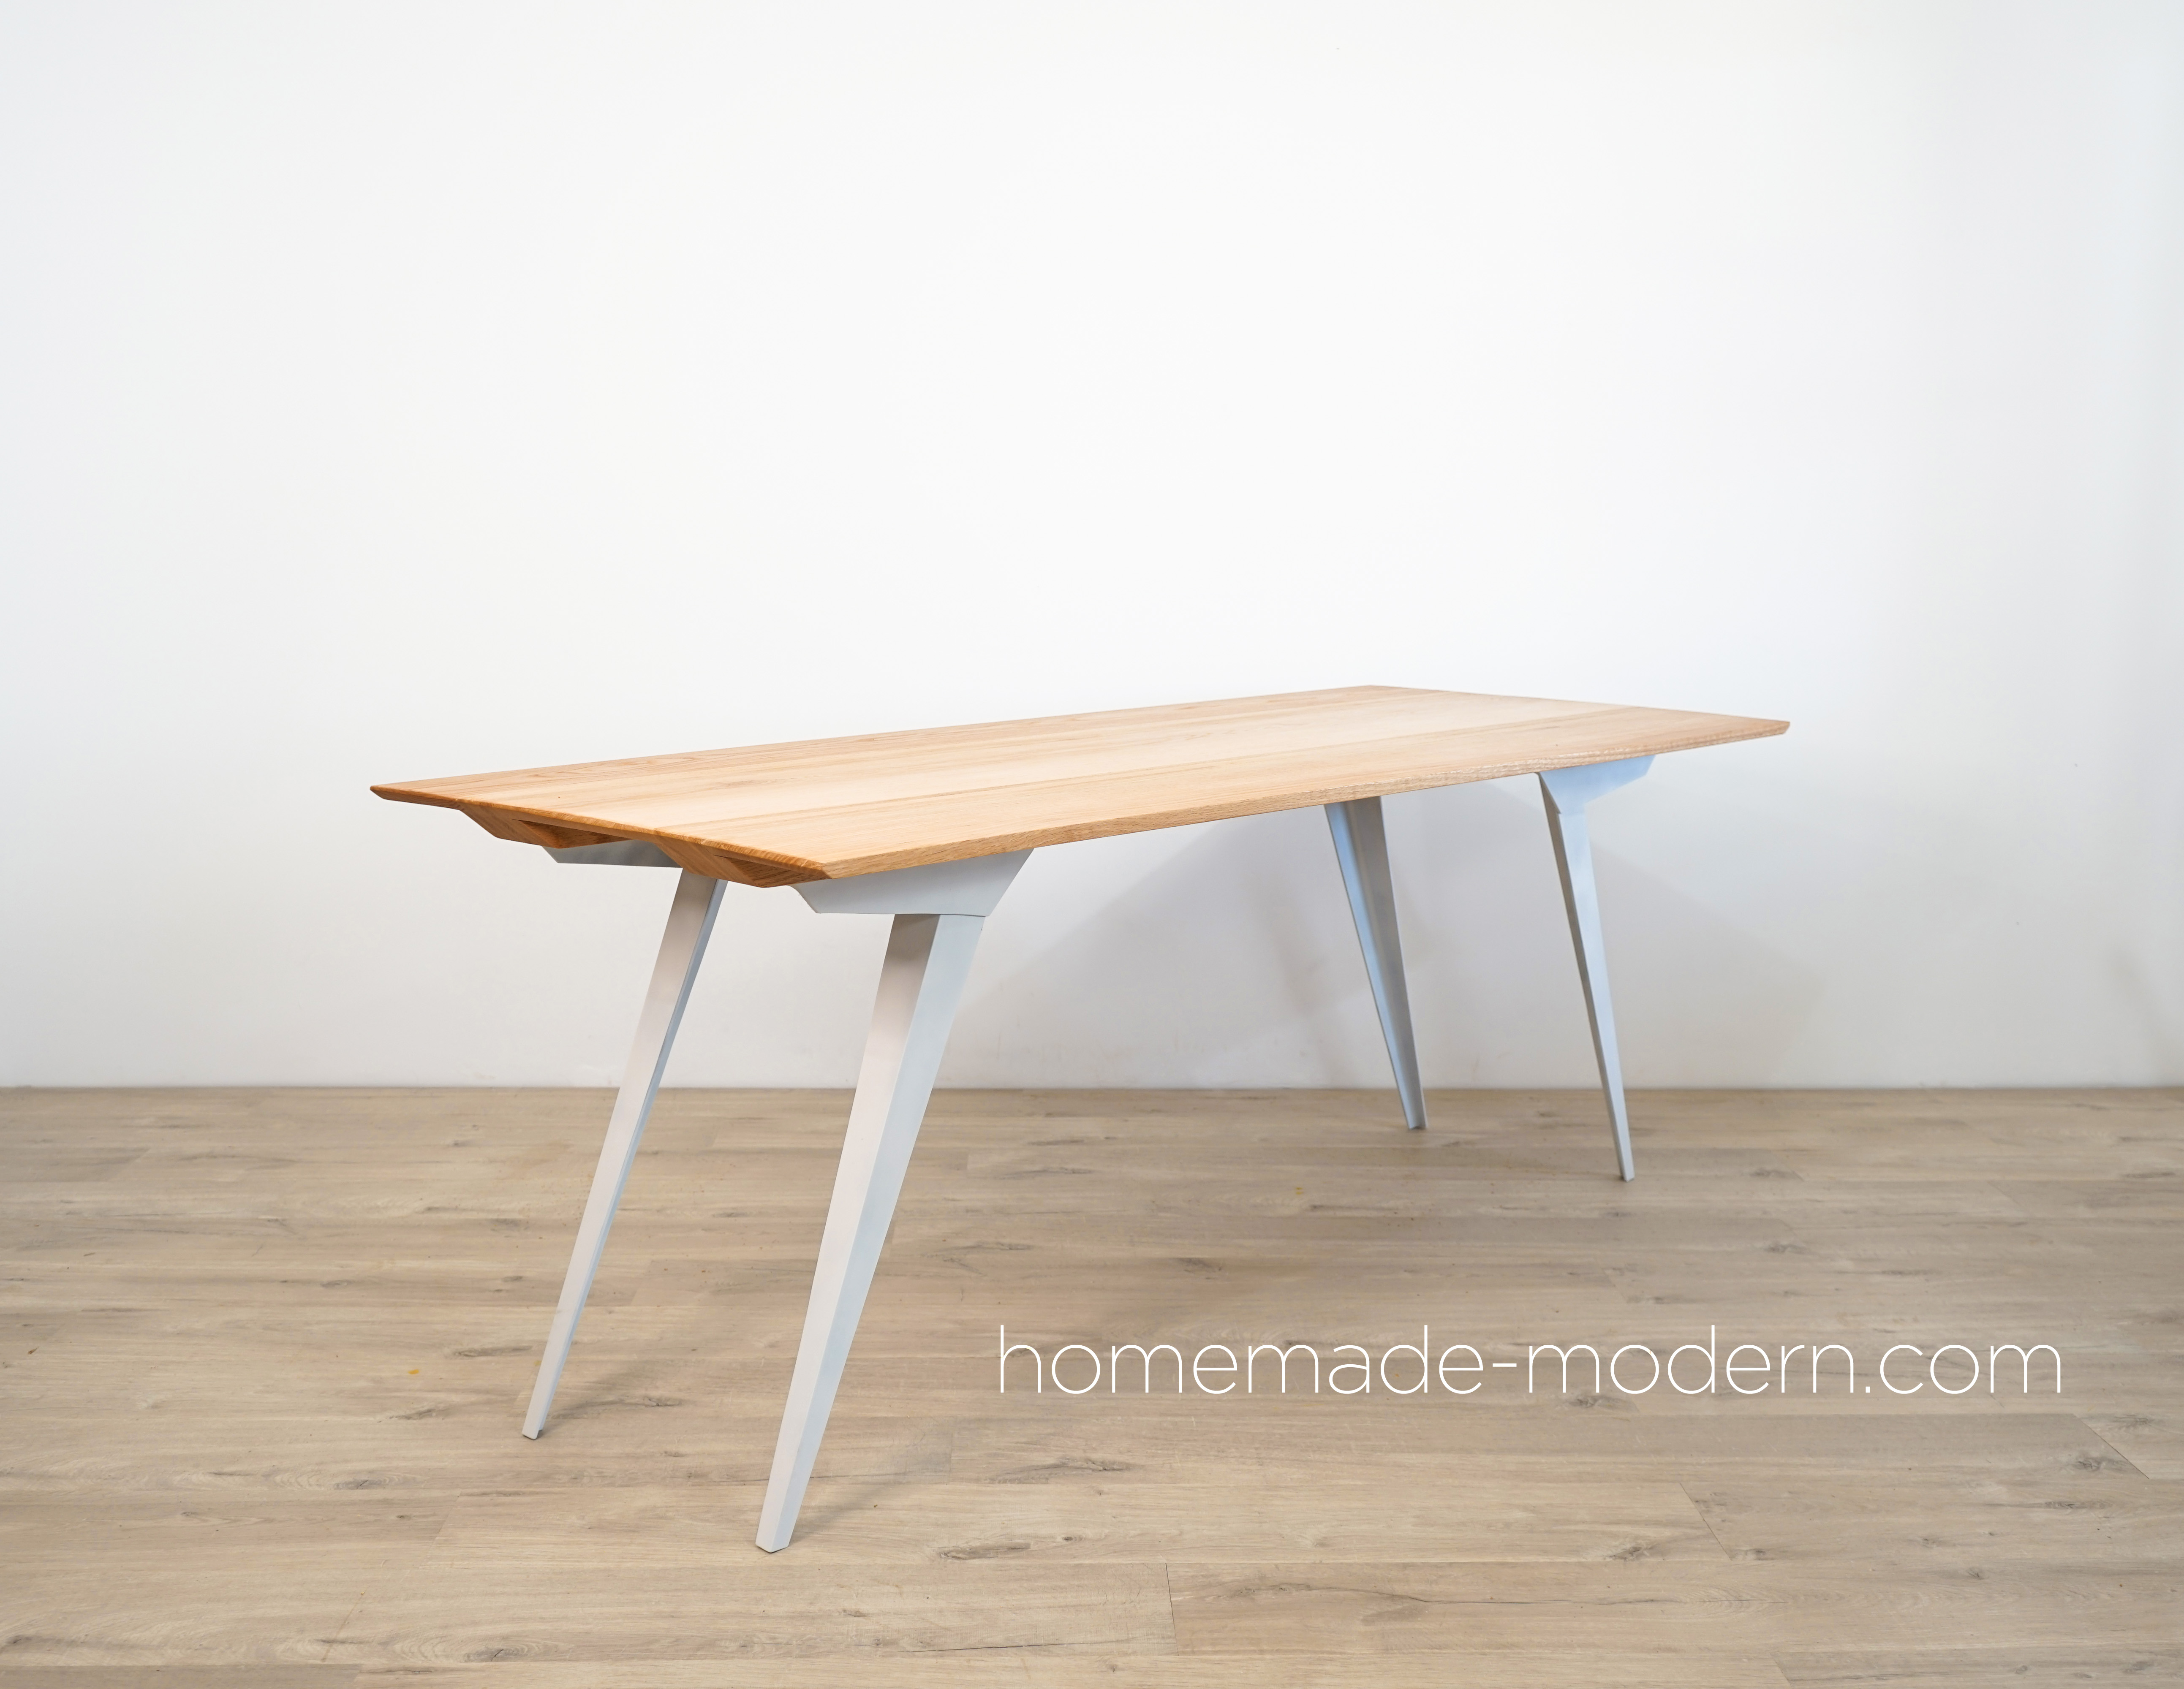 This DIY modern dining table features custom steel table legs that made out of 3”x3”x3/16” steel angles and an oak table top made out of ¾” thick oak from Home Depot. For more information go to HomeMade-Modern.com